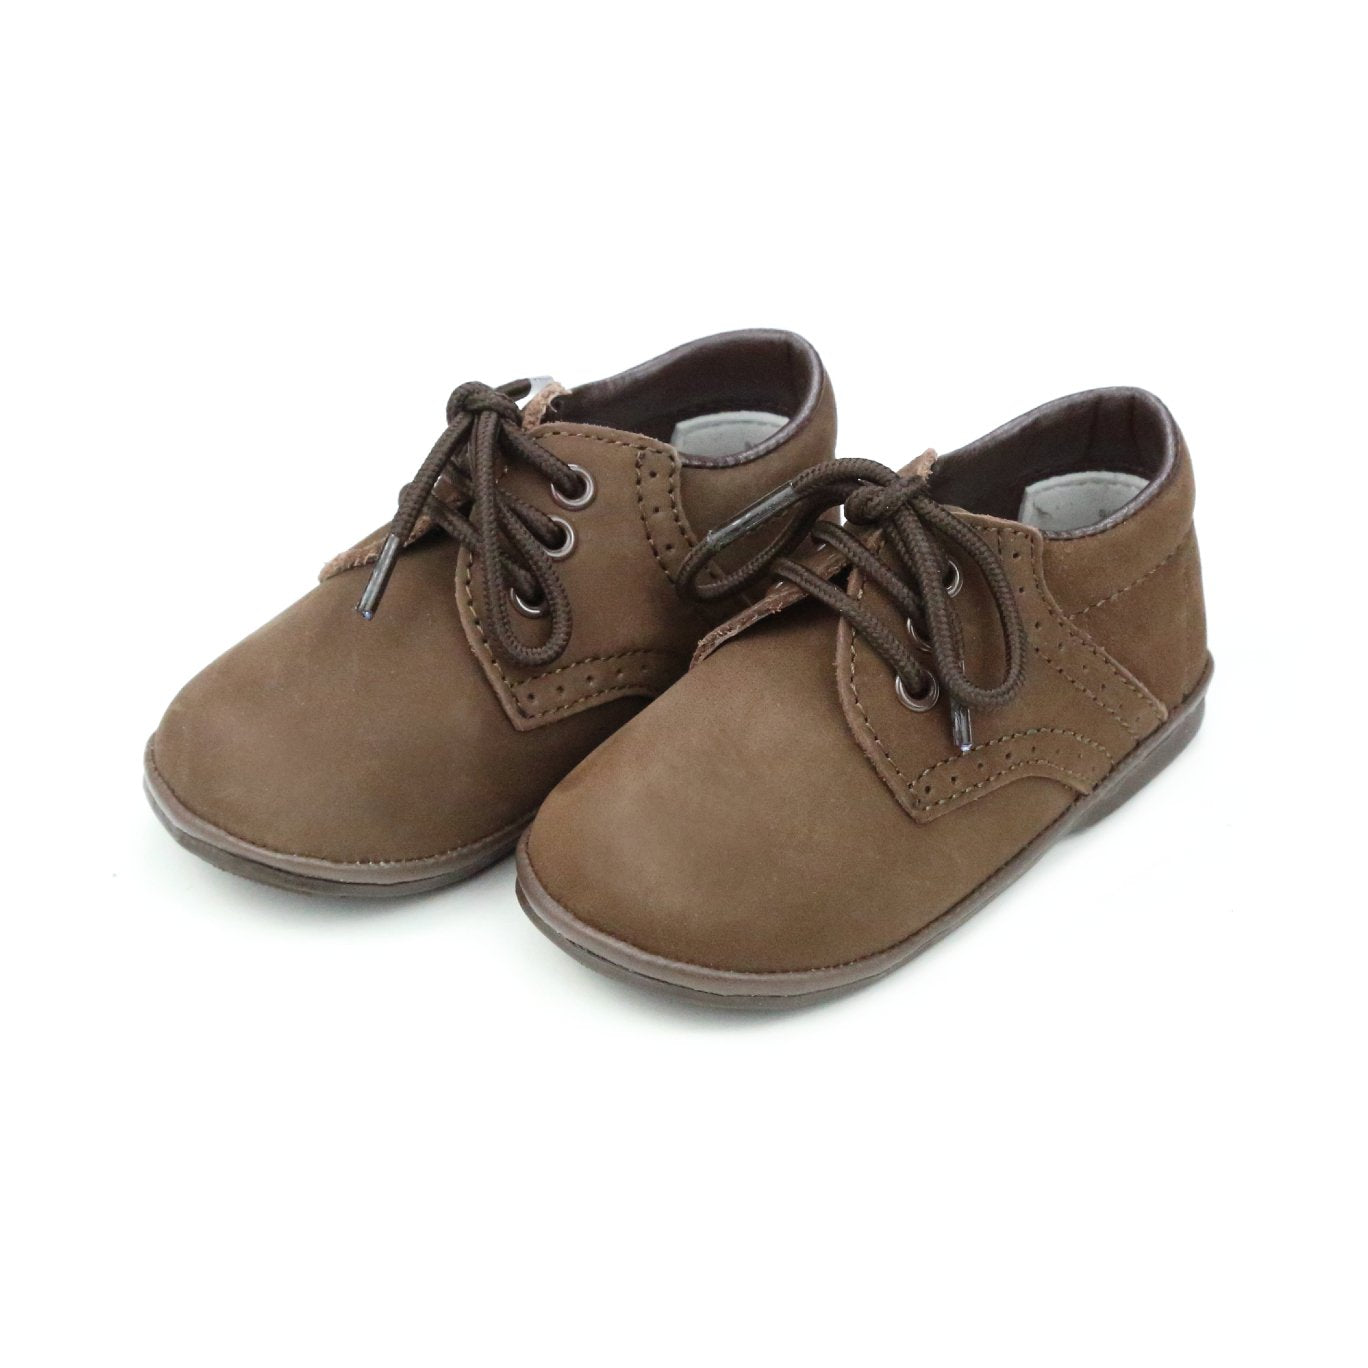 James Leather Lace-Up Shoe | 2157 Nubuck Brown